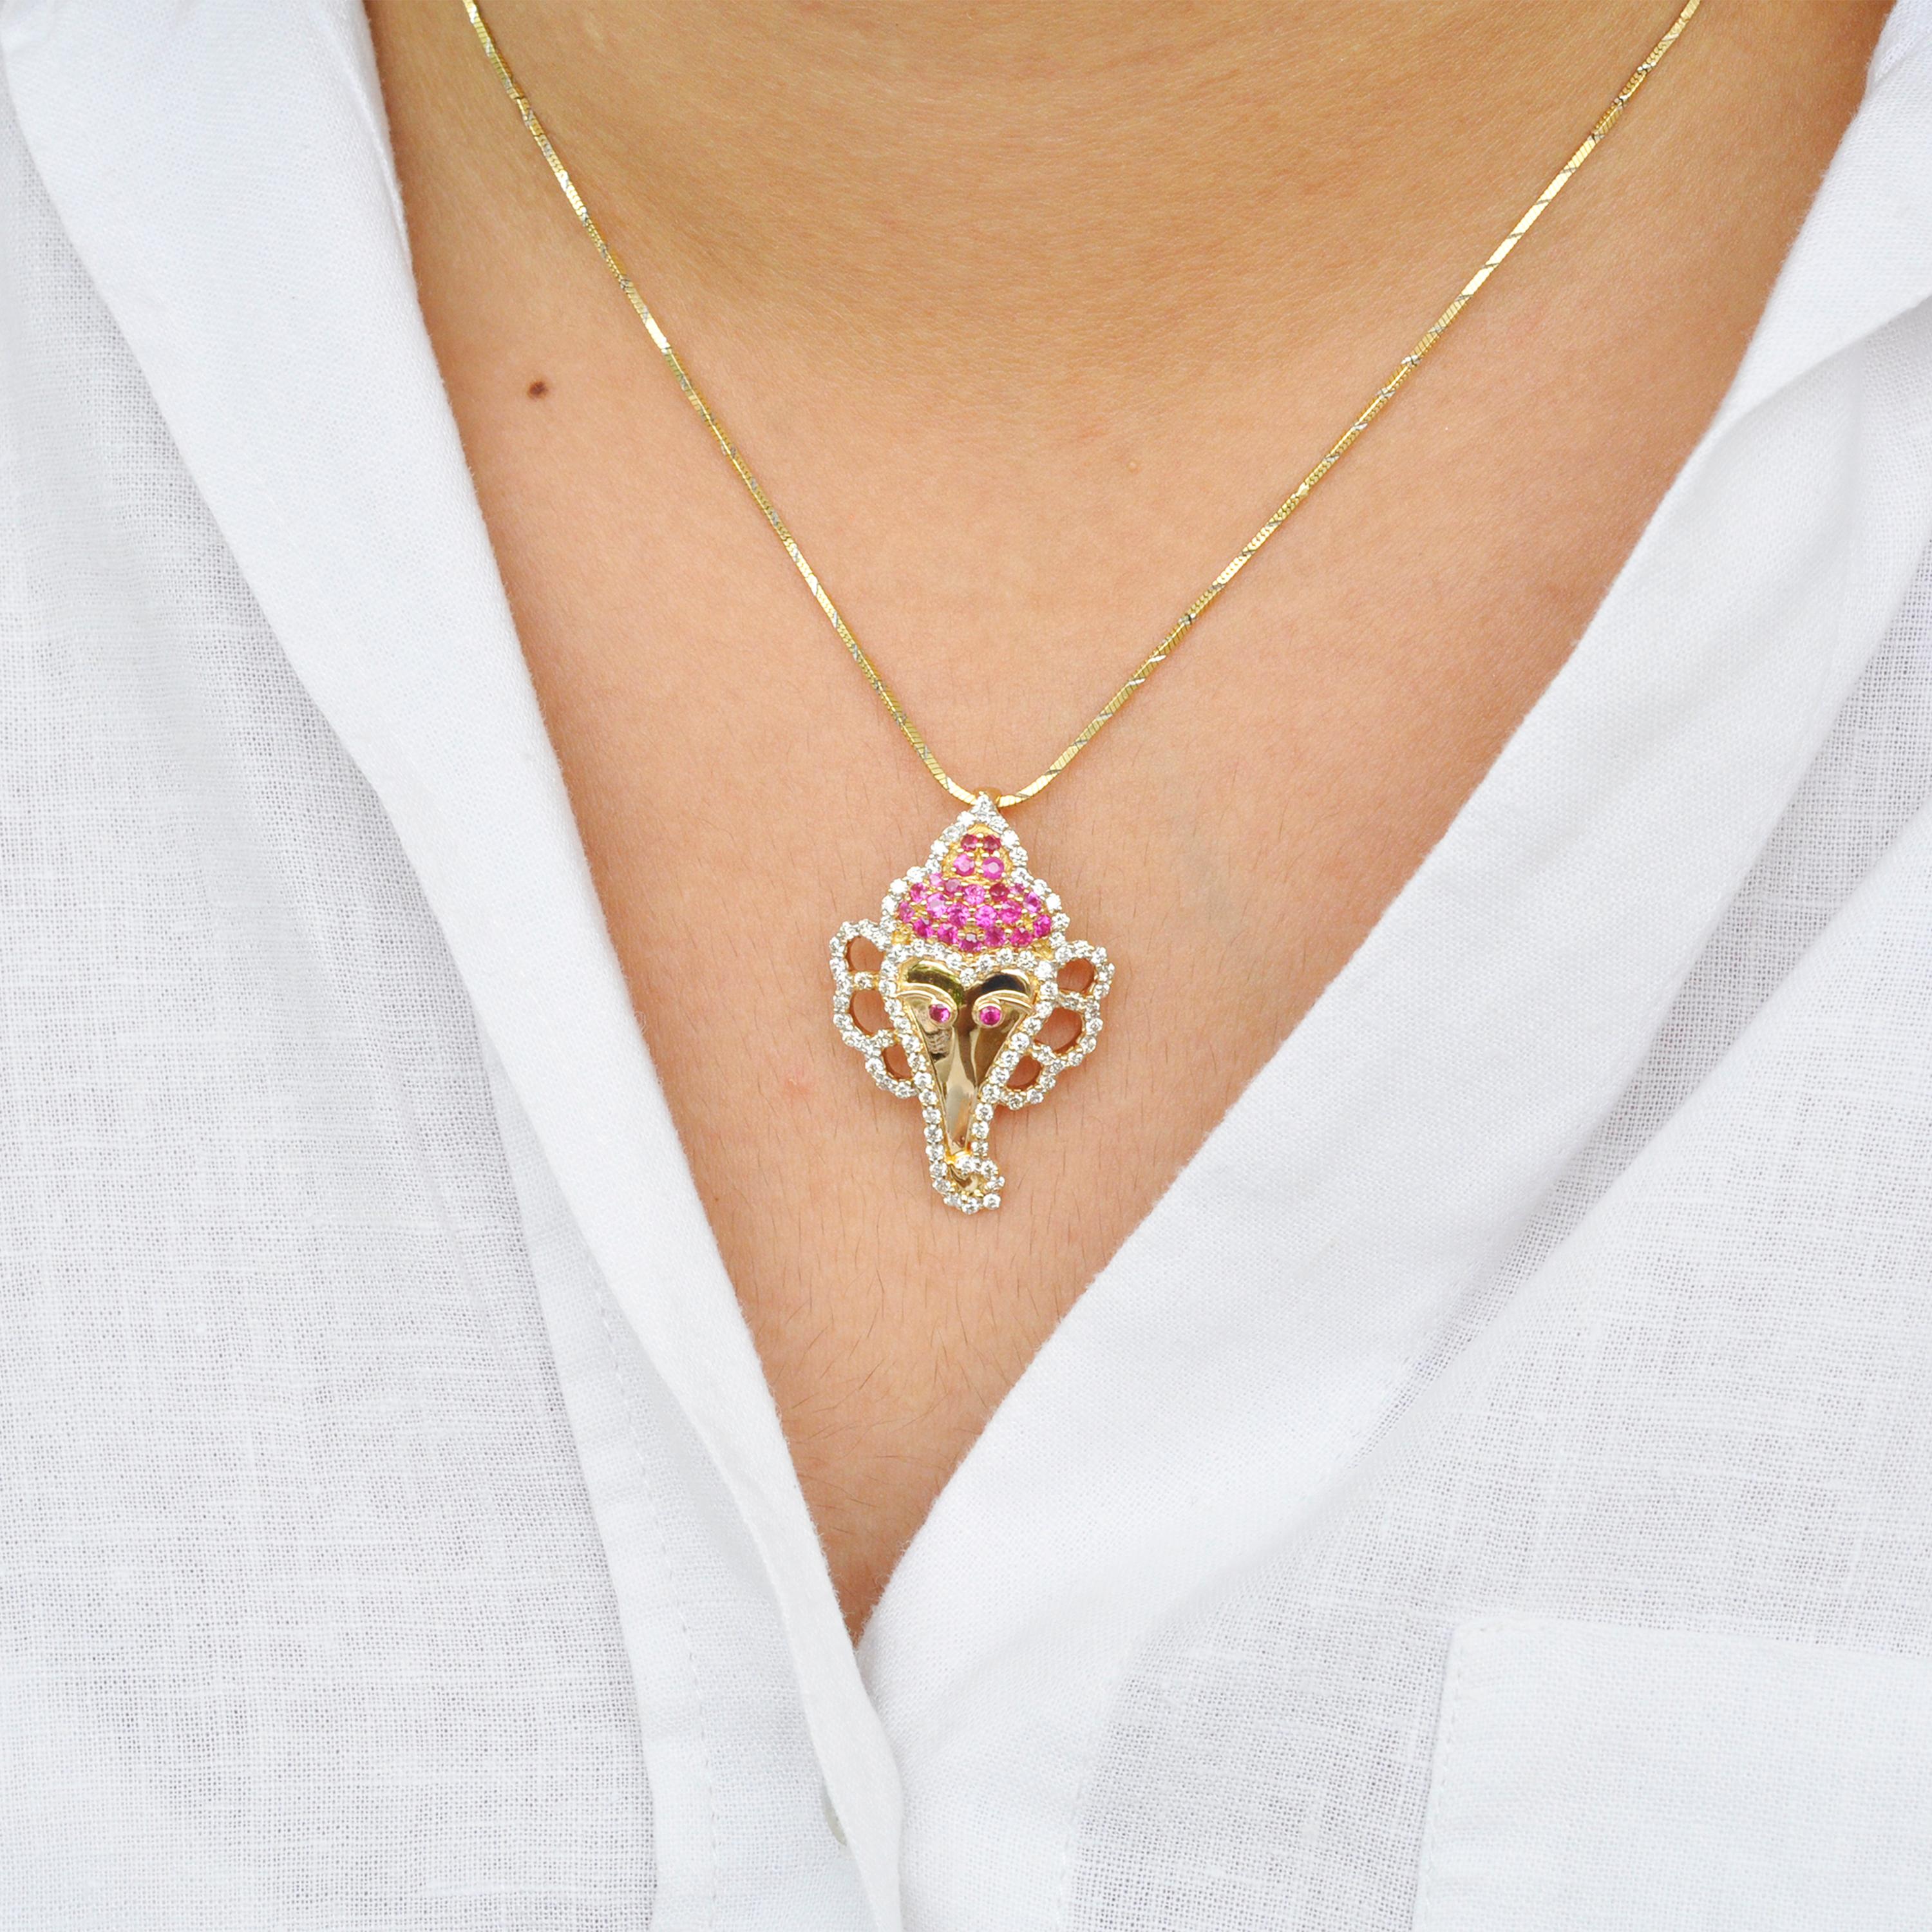 18 Karat Gold Ganesha Round Ruby Diamond Pendant Necklace In New Condition For Sale In Jaipur, Rajasthan